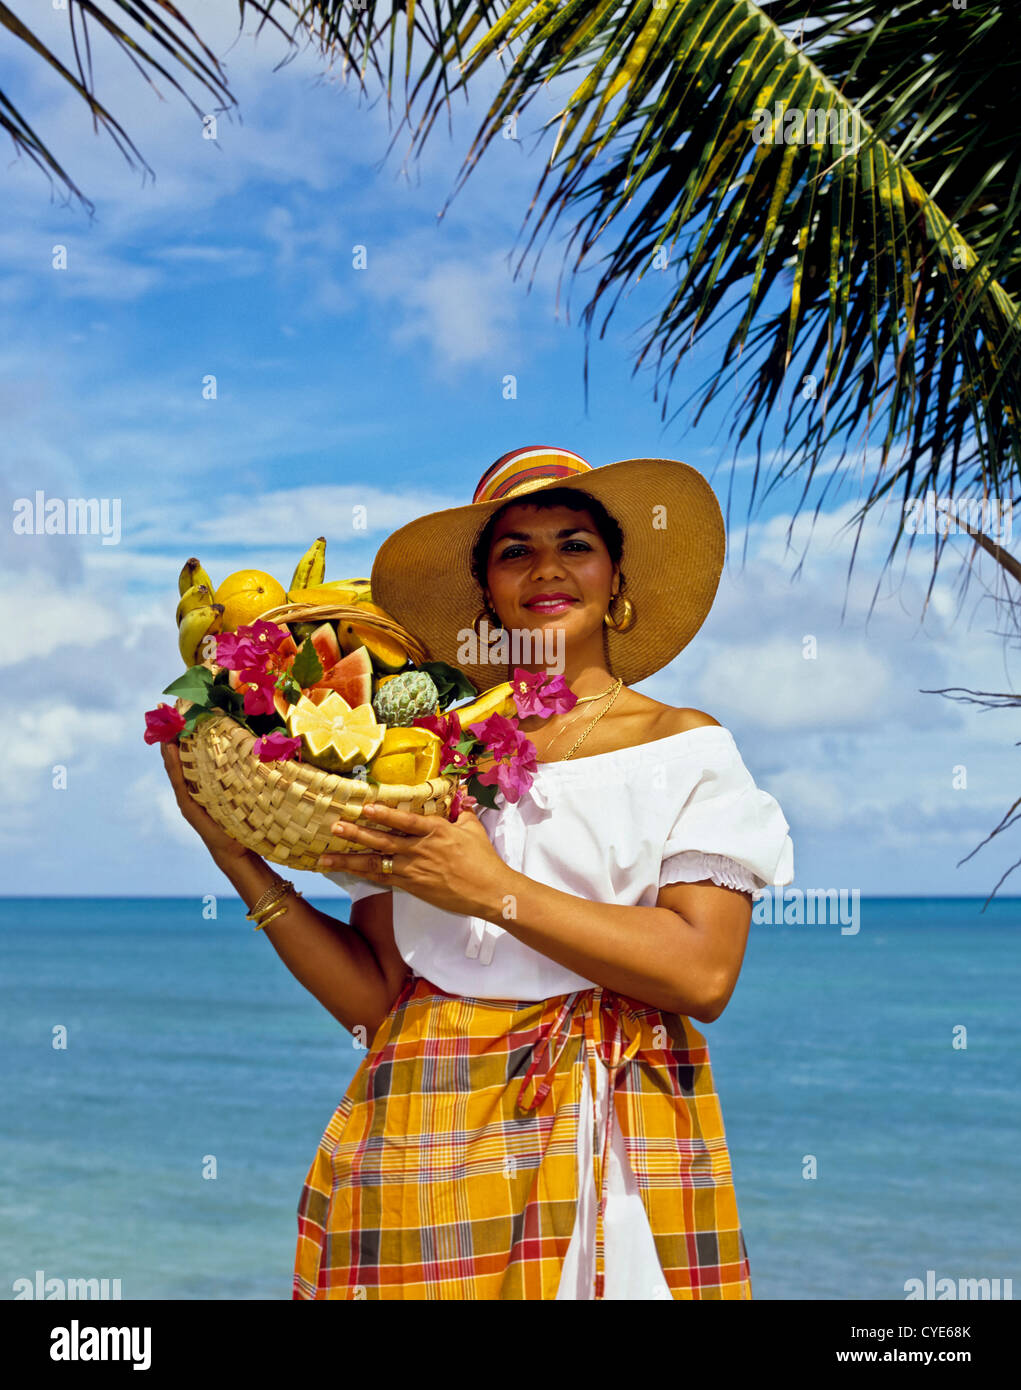 8207. Local Dress, Caribbean, West Indies Stock Photo